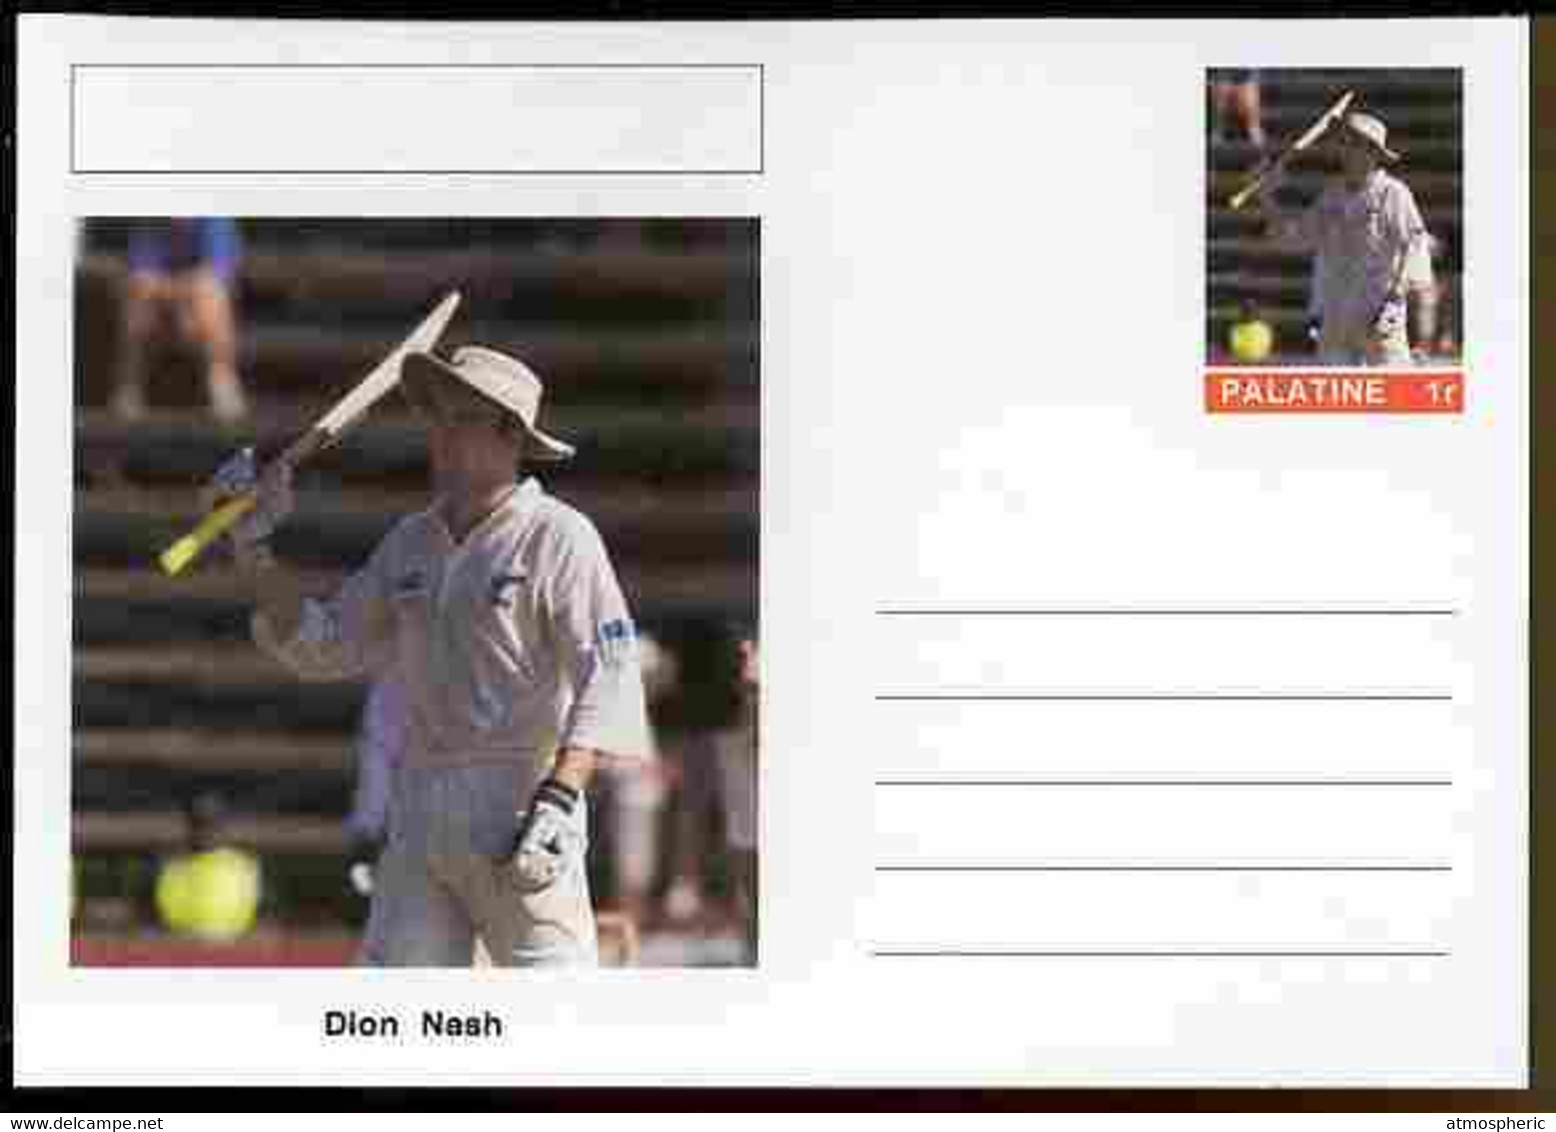 Palatine (Fantasy) Personalities - Dion Nash (cricket) Postal Stationery Card Unused And Fine - Cricket